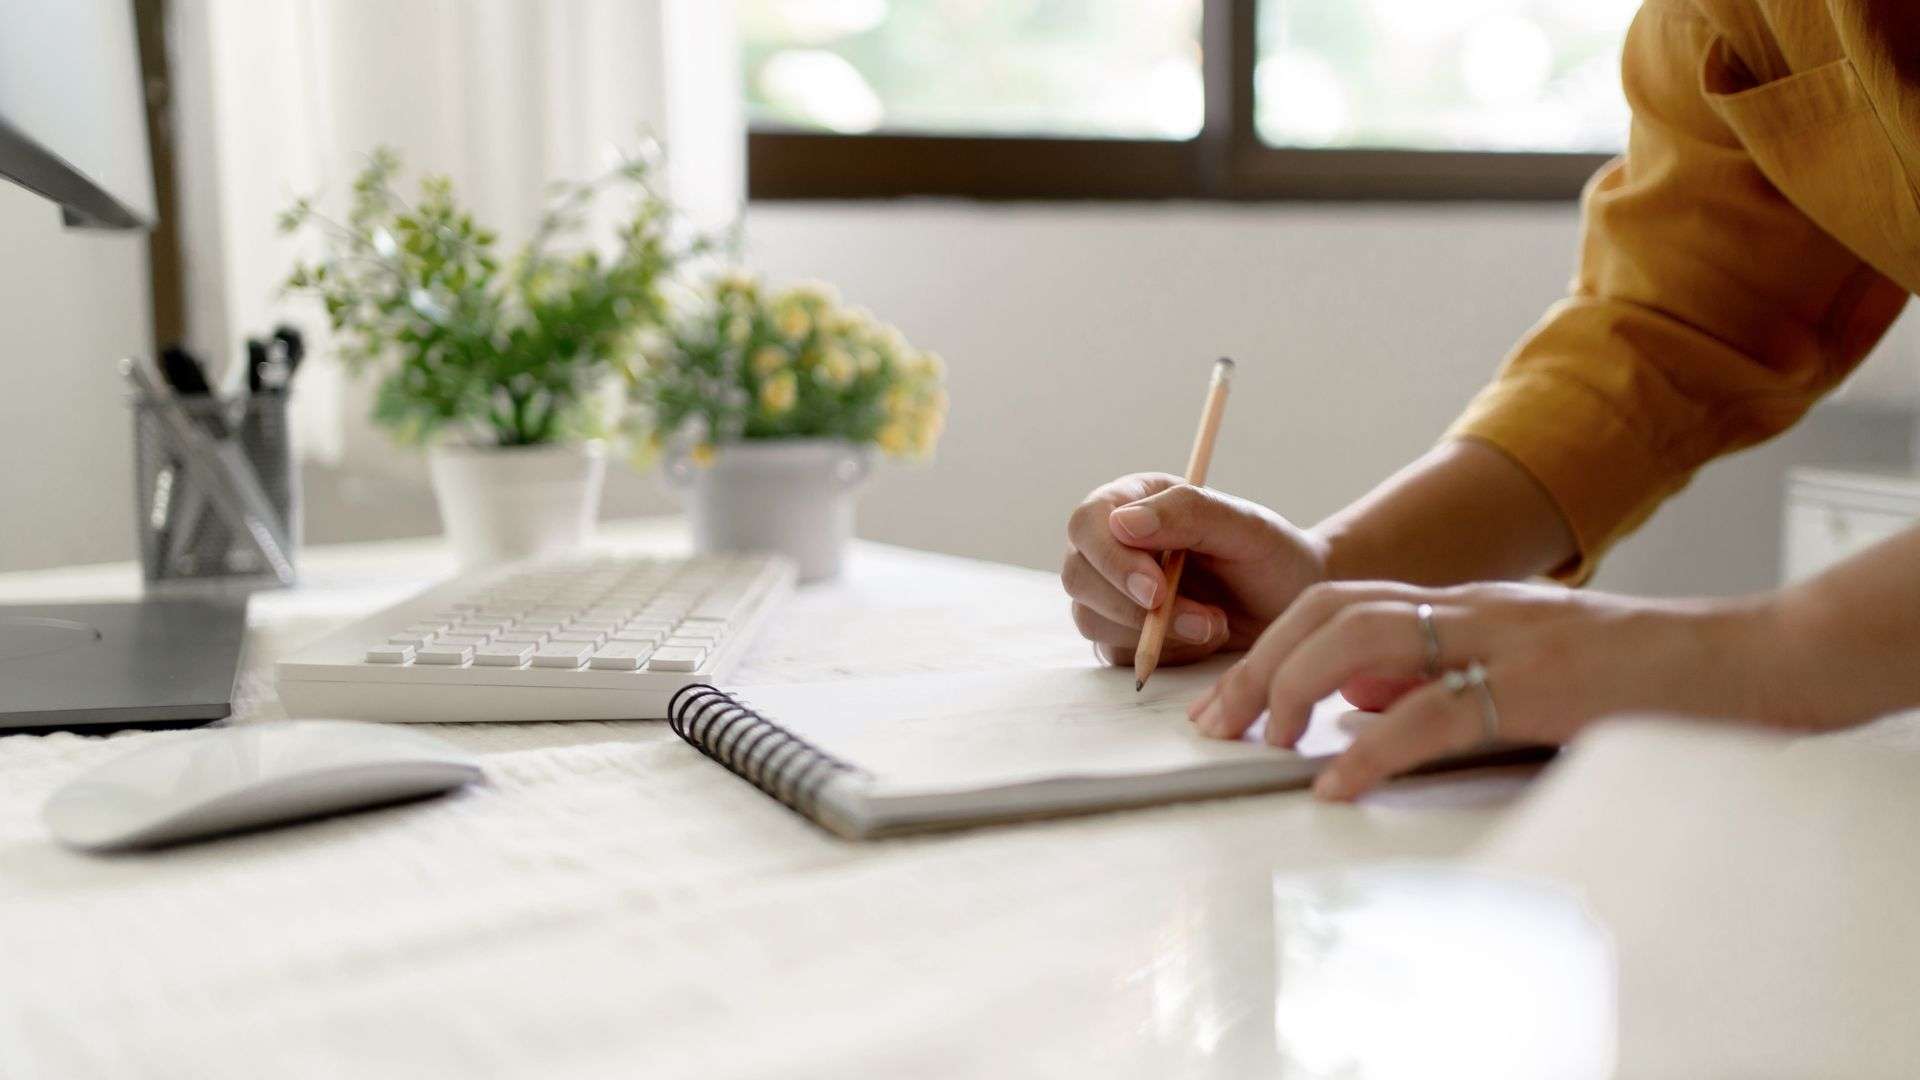 Woman writing in a notebook on clean, uncluttered desk.